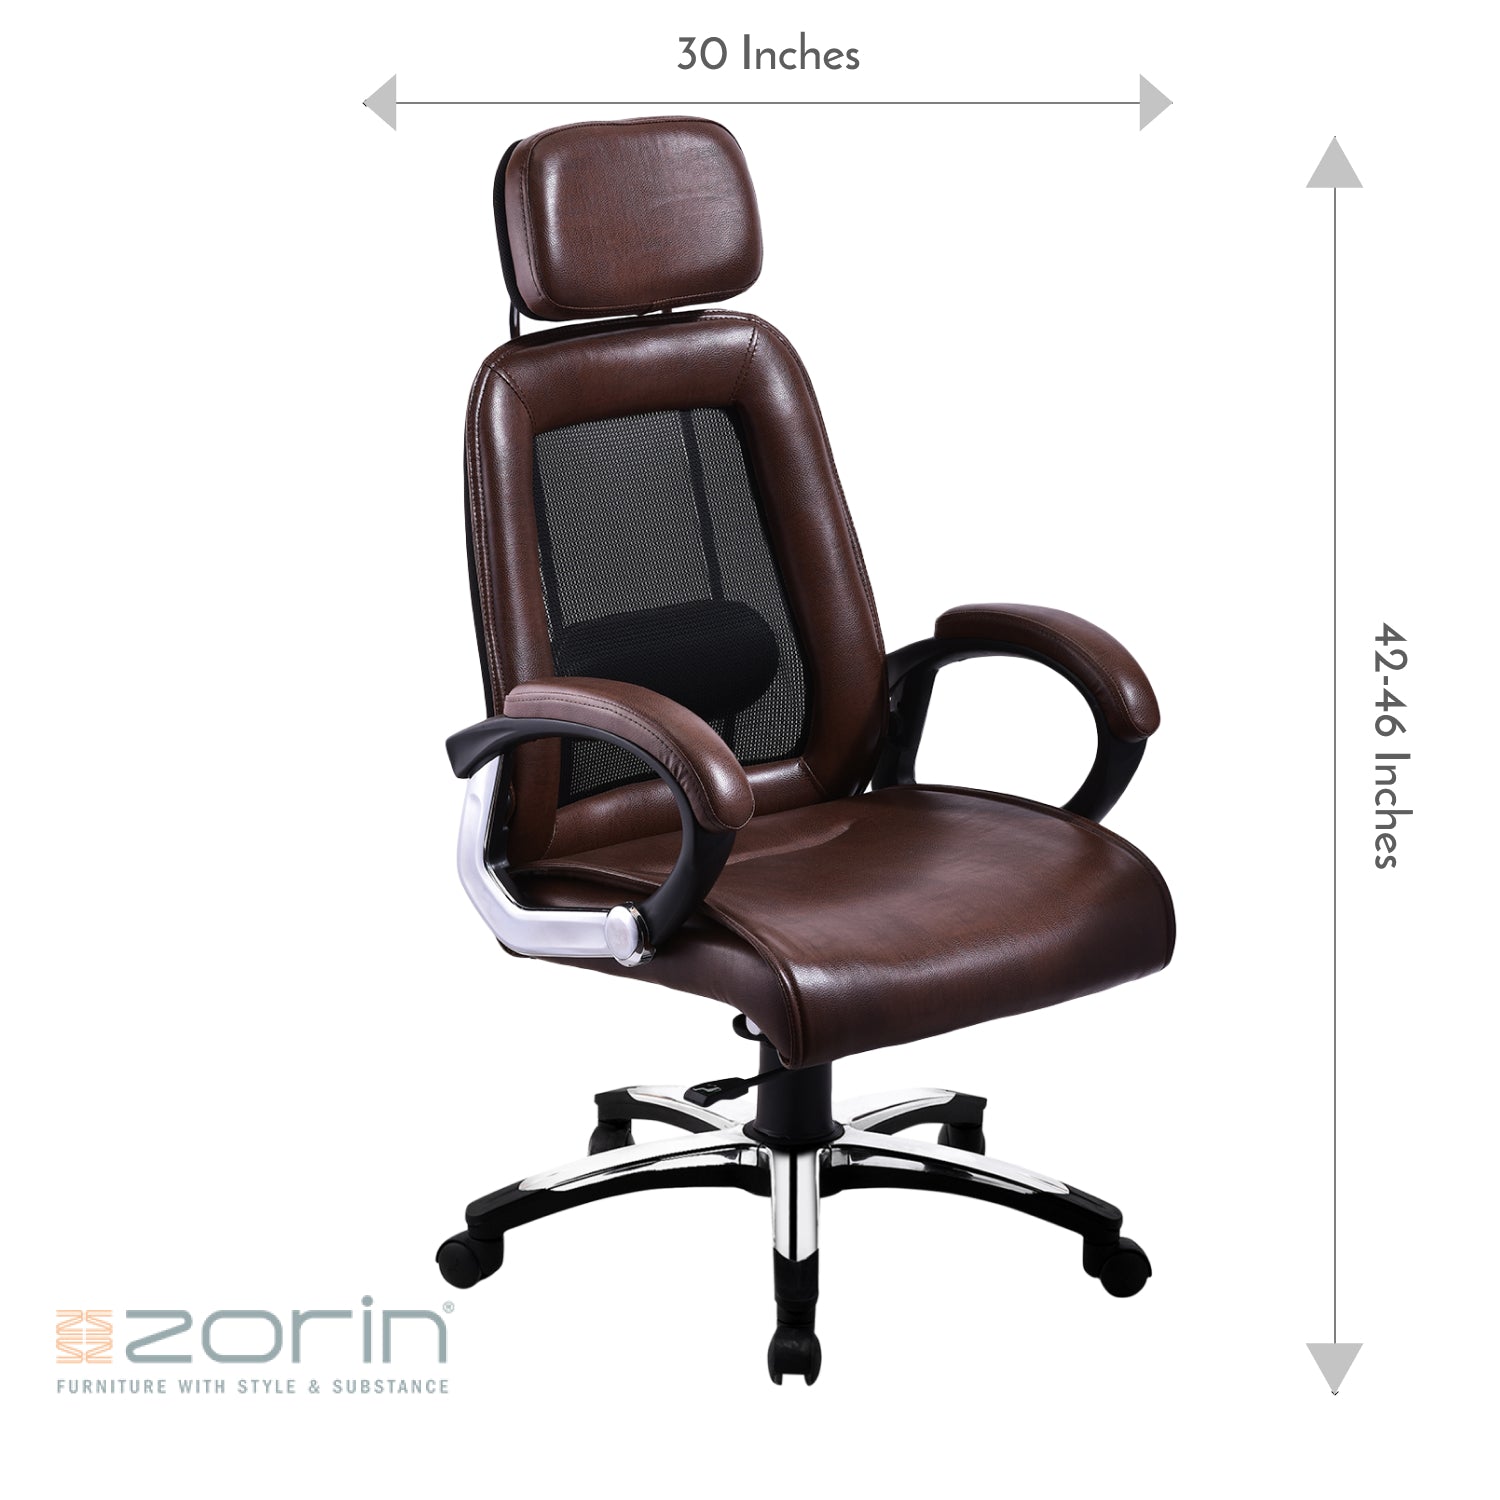 ZFE1019 High Back Chair by Zorin in BrownBlack Color Zorin